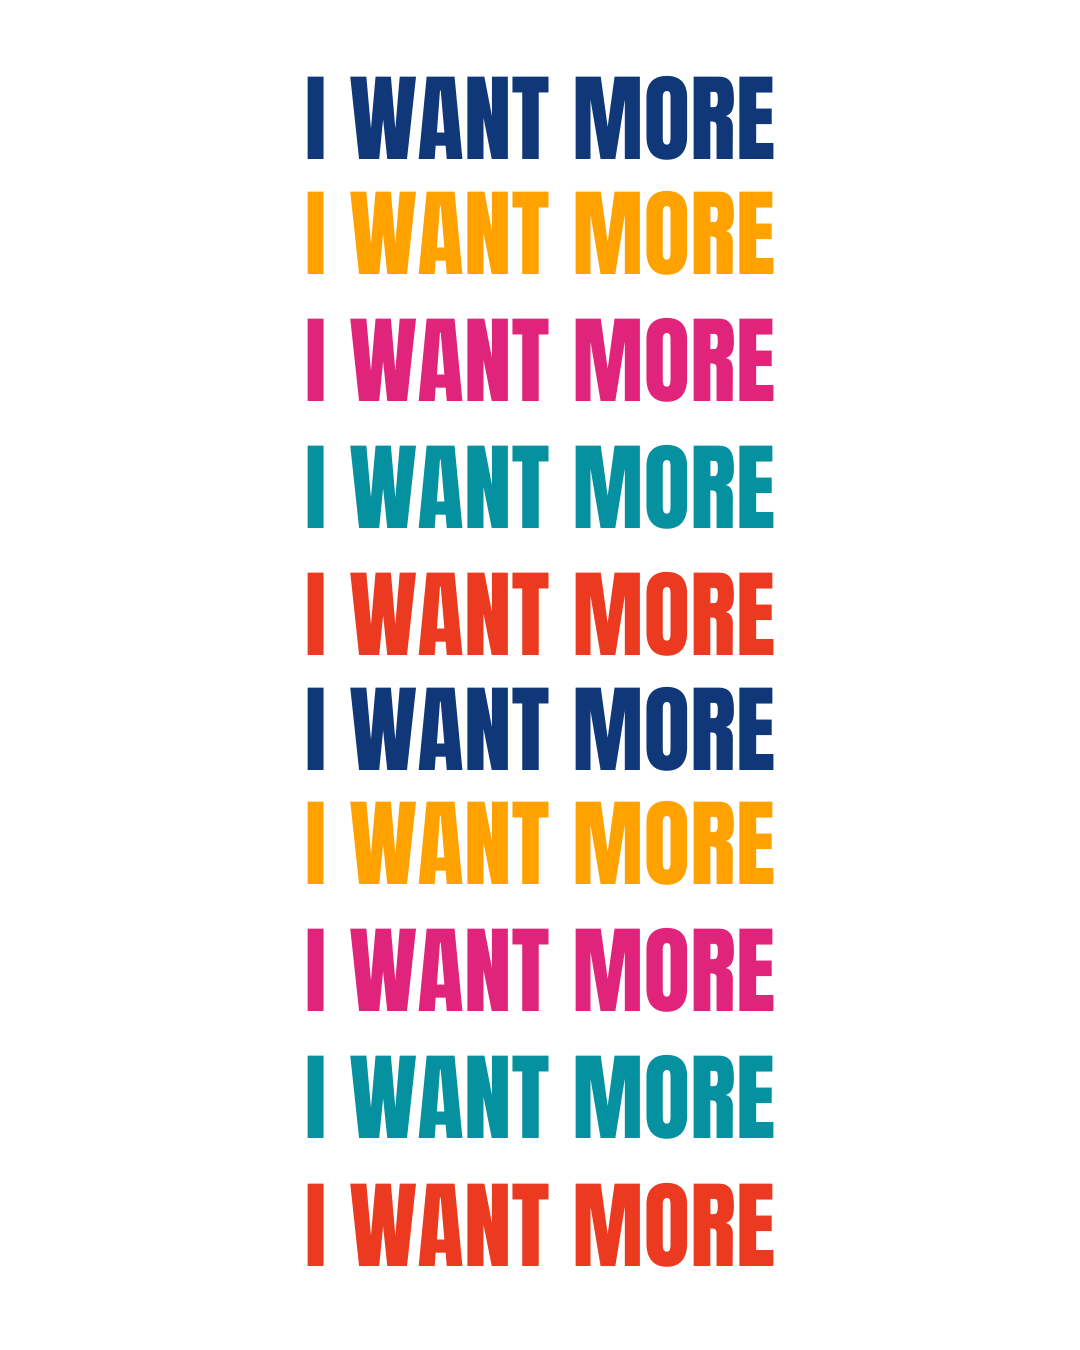 I want more